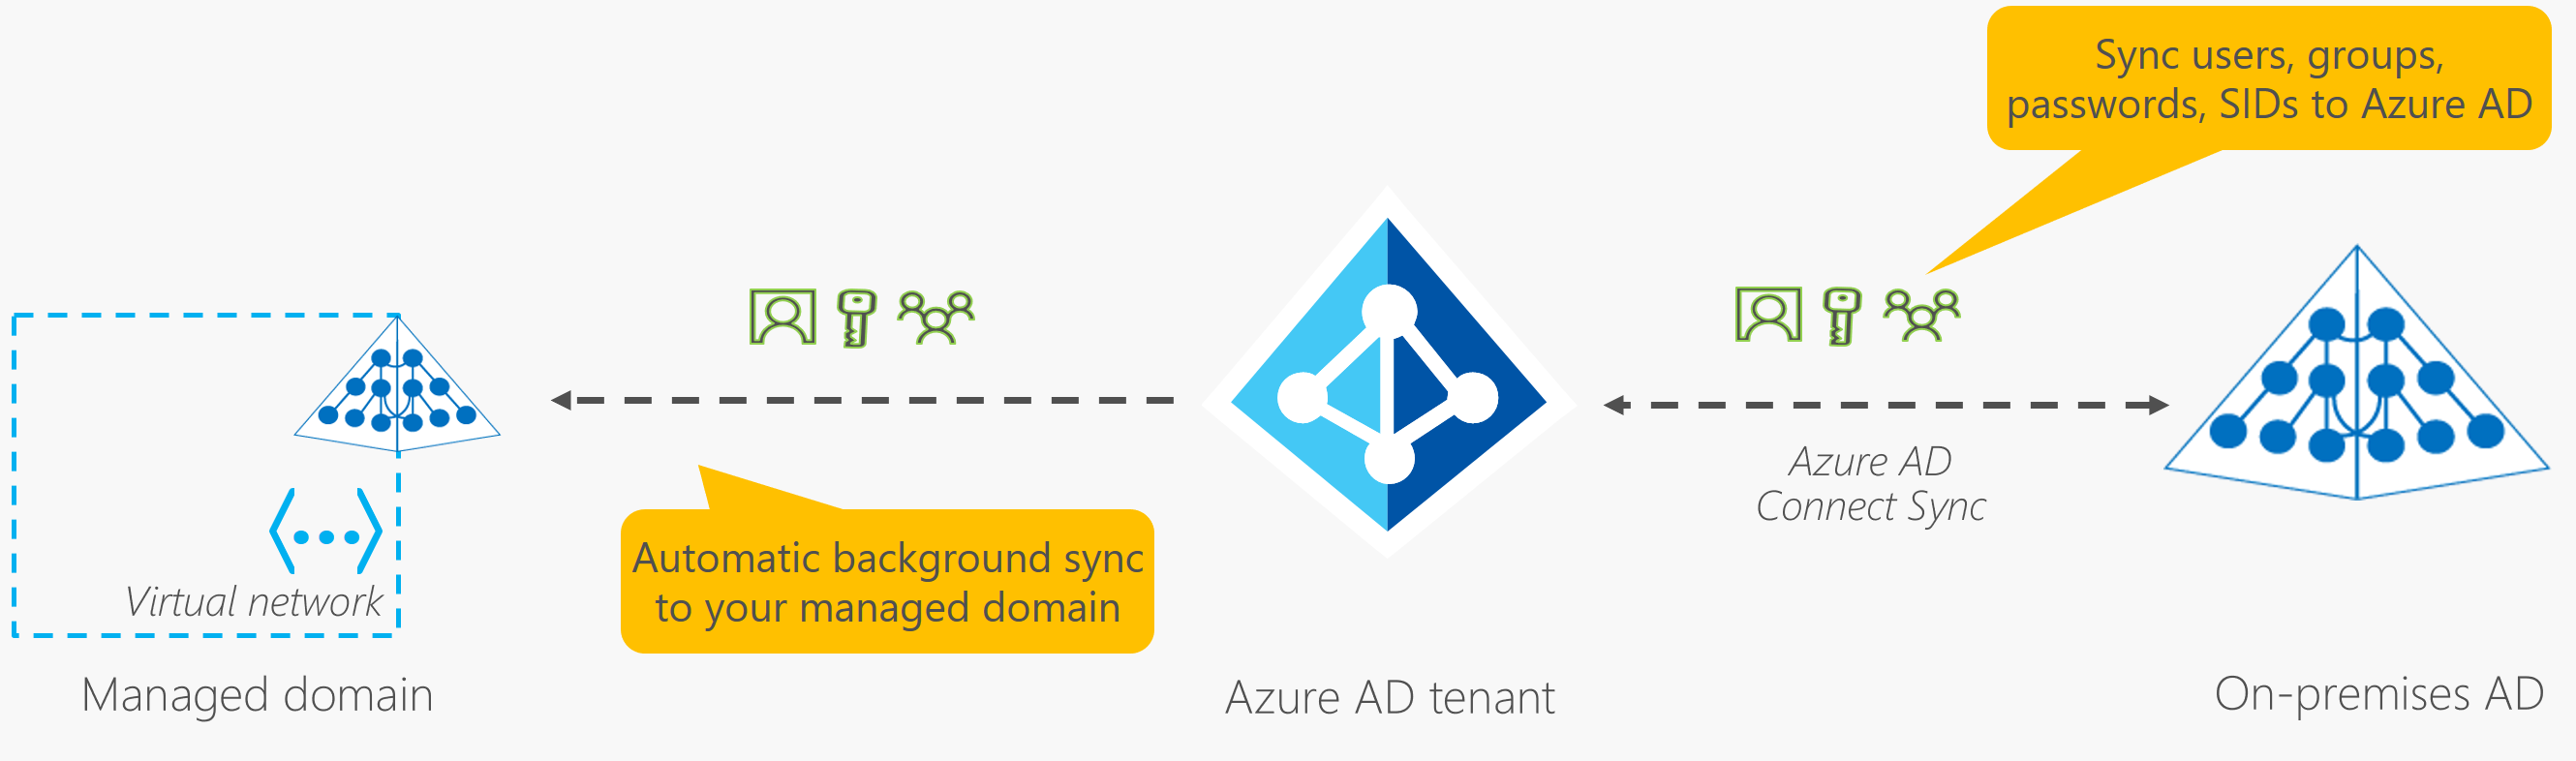 Diagram of Microsoft Entra Connect Sync synchronizing information back to the Microsoft Entra tenant from on-premises AD.